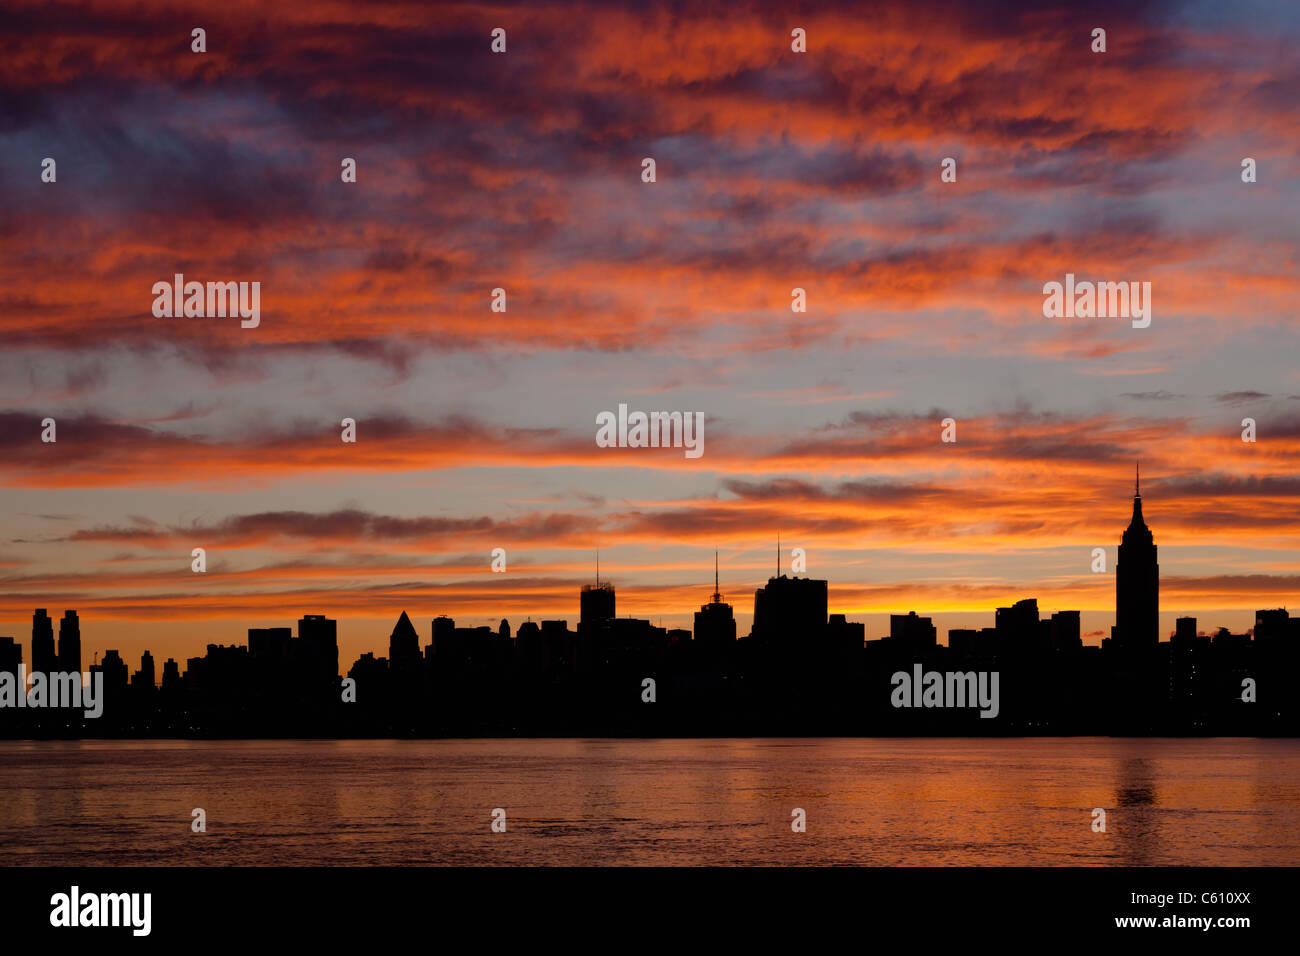 The sky begins to lighten and clouds reflect pre-sunrise color over the midtown Manhattan skyline in New York City. Stock Photo